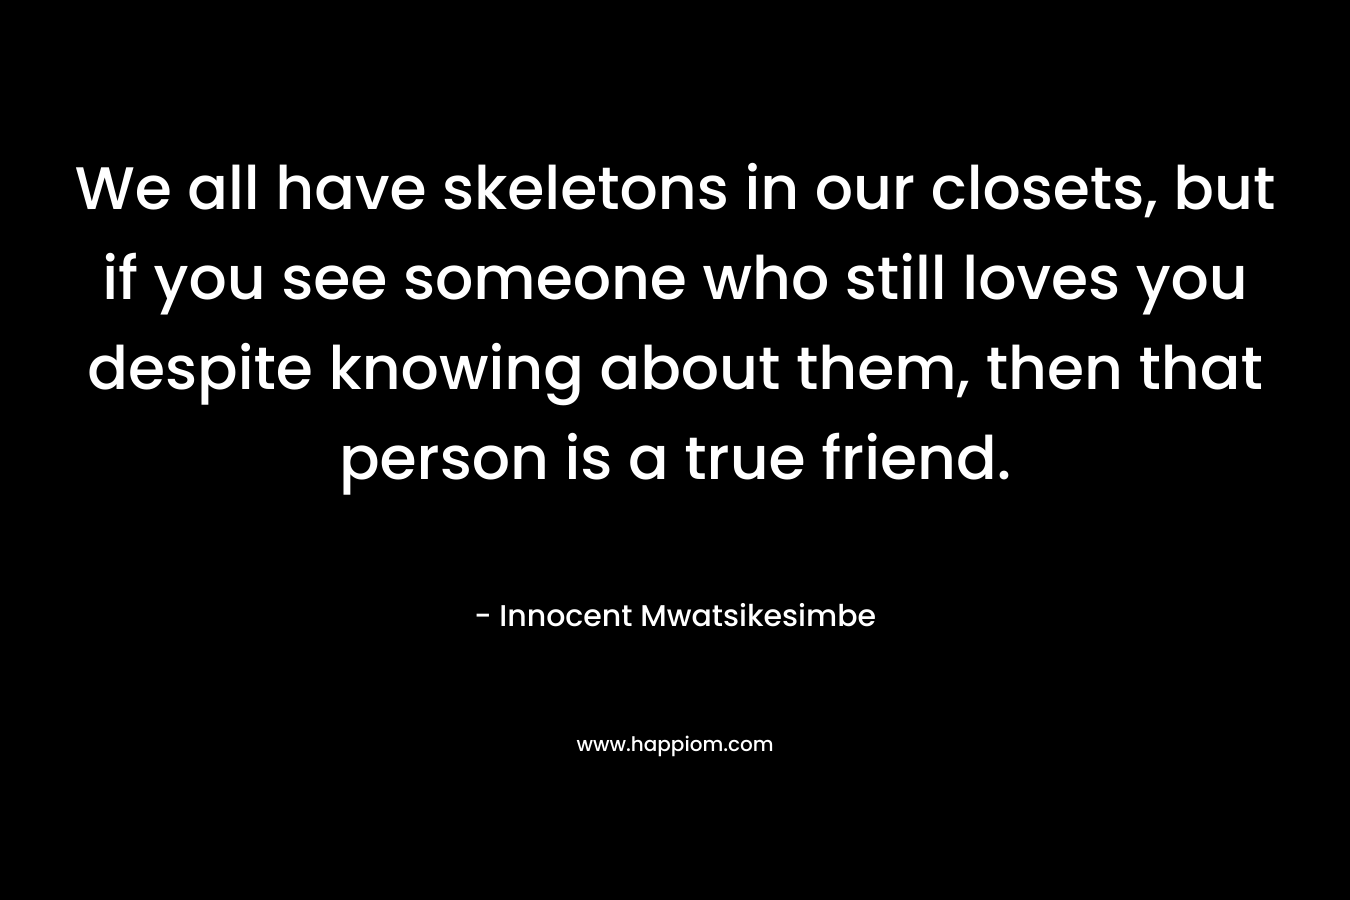 We all have skeletons in our closets, but if you see someone who still loves you despite knowing about them, then that person is a true friend. – Innocent Mwatsikesimbe